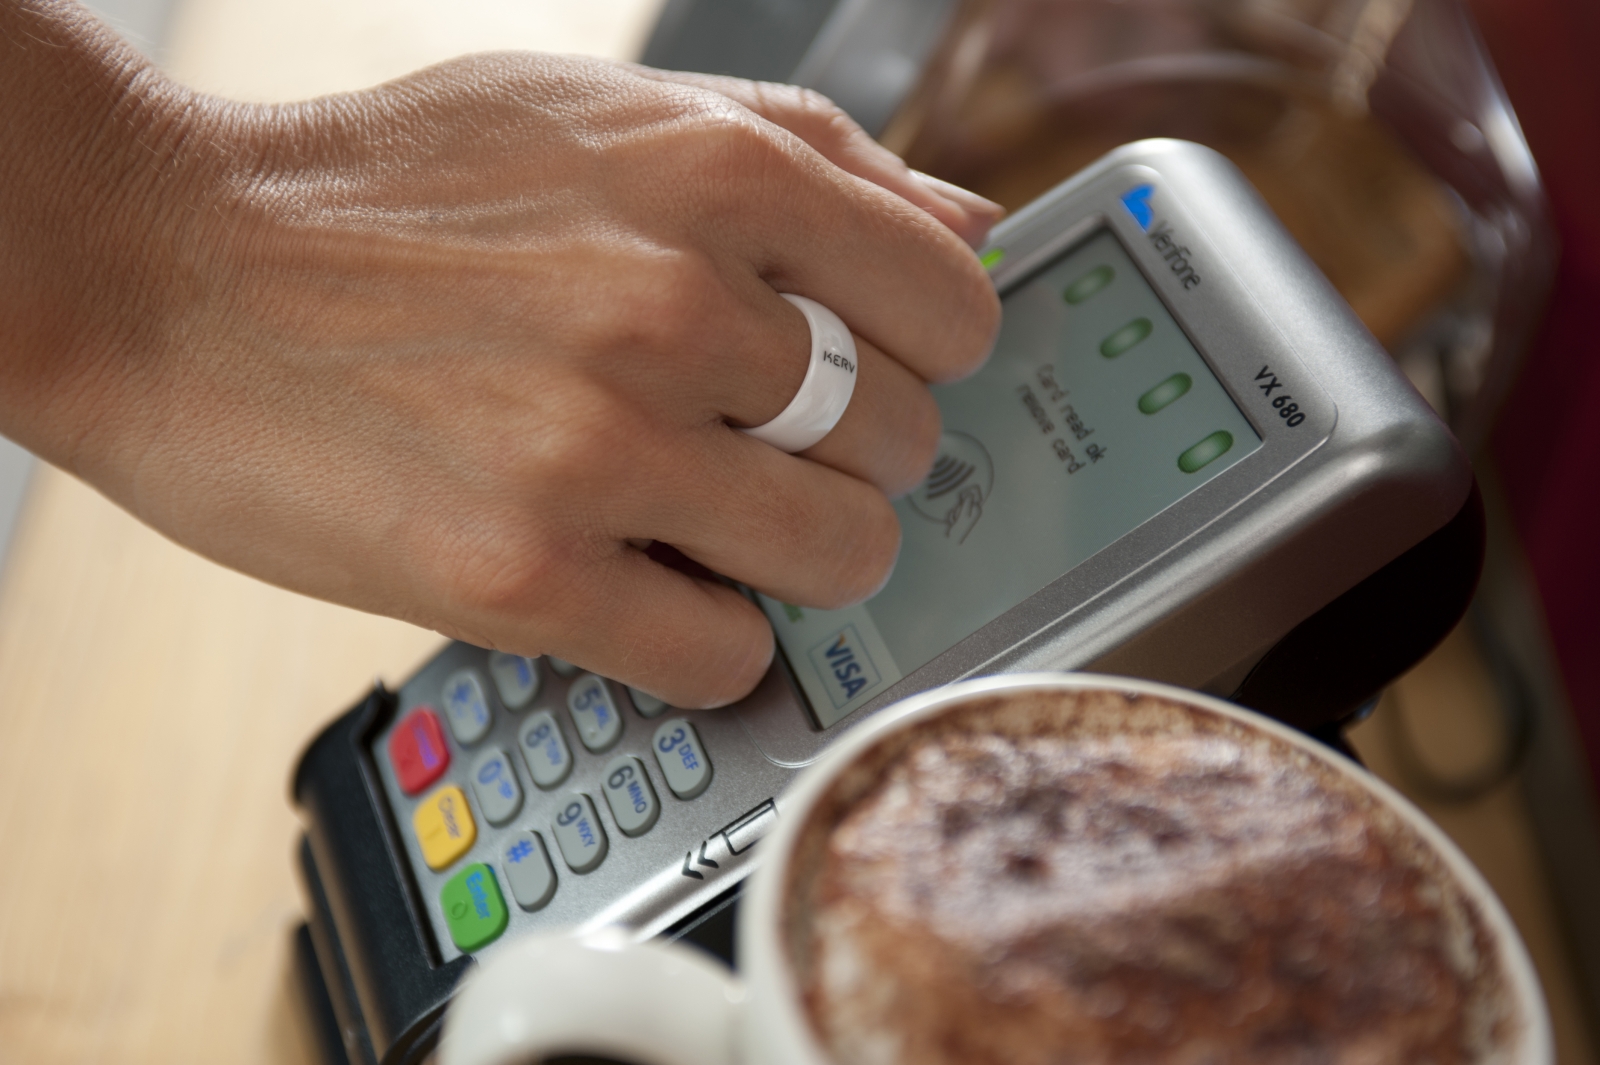 World's first NFC payment ring powered by Infineon's contactless security  chip - Infineon Technologies